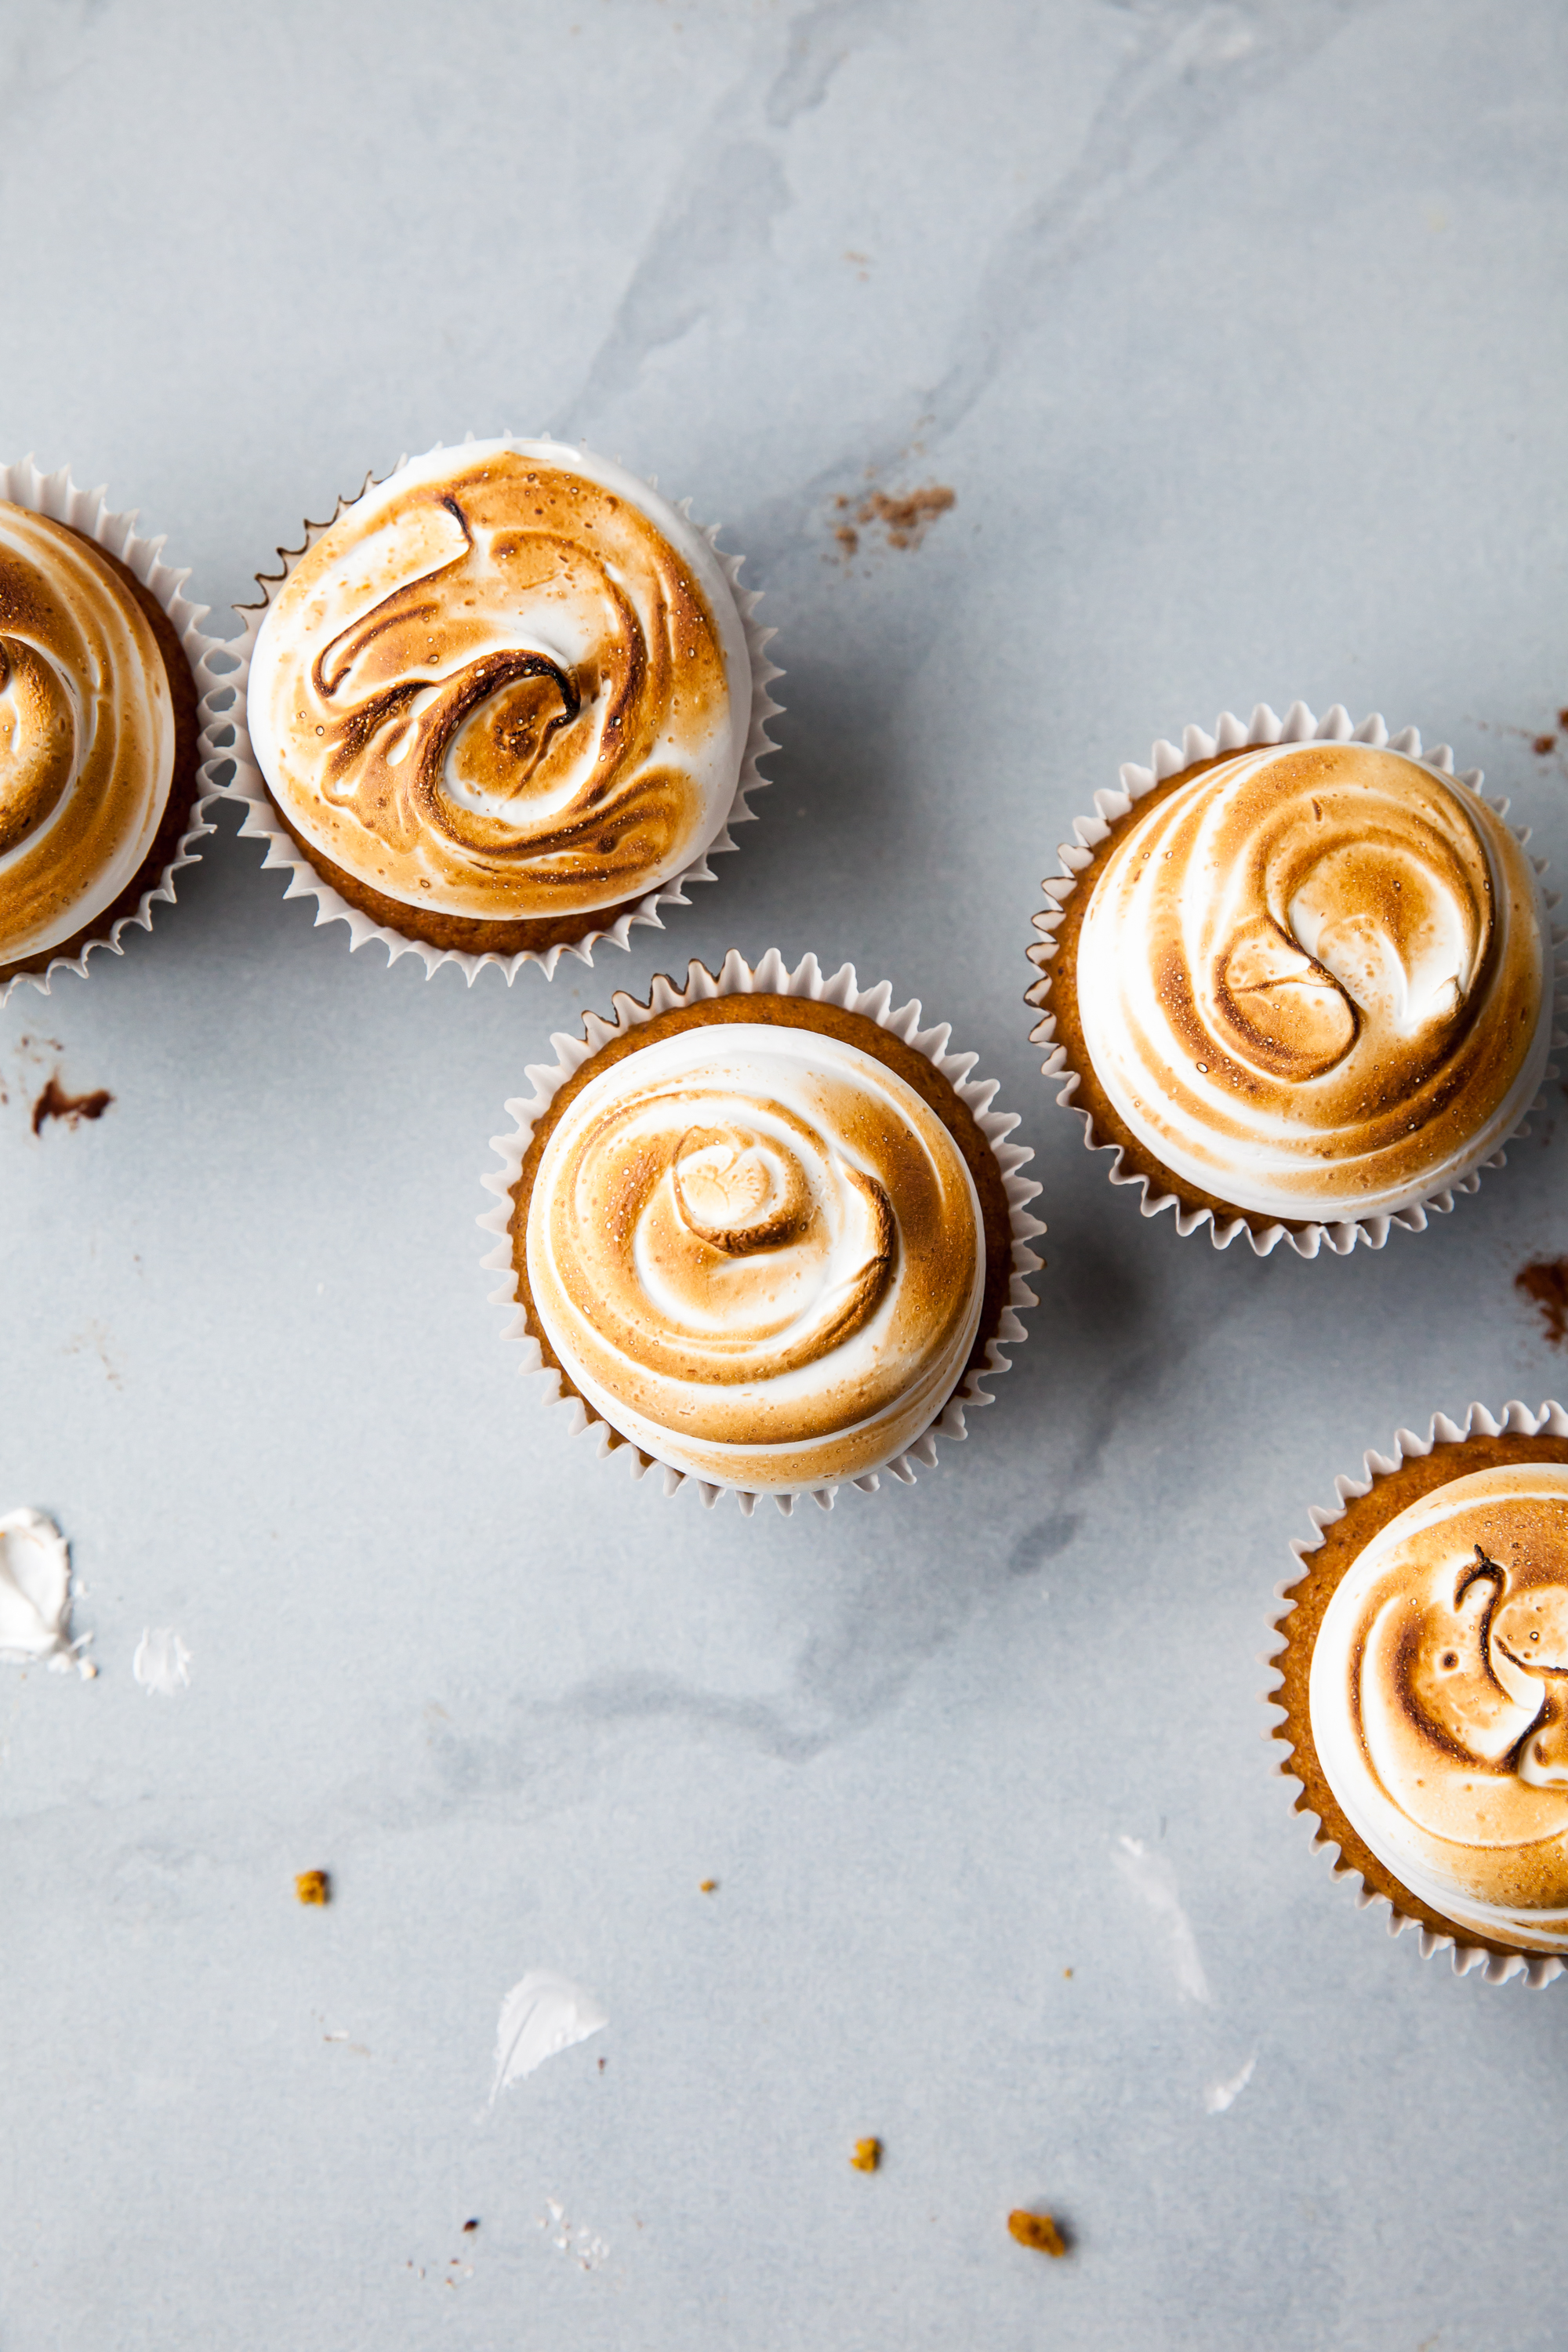 Toasted Pumpkin S'mores Cupcakes with chocolate ganache filling